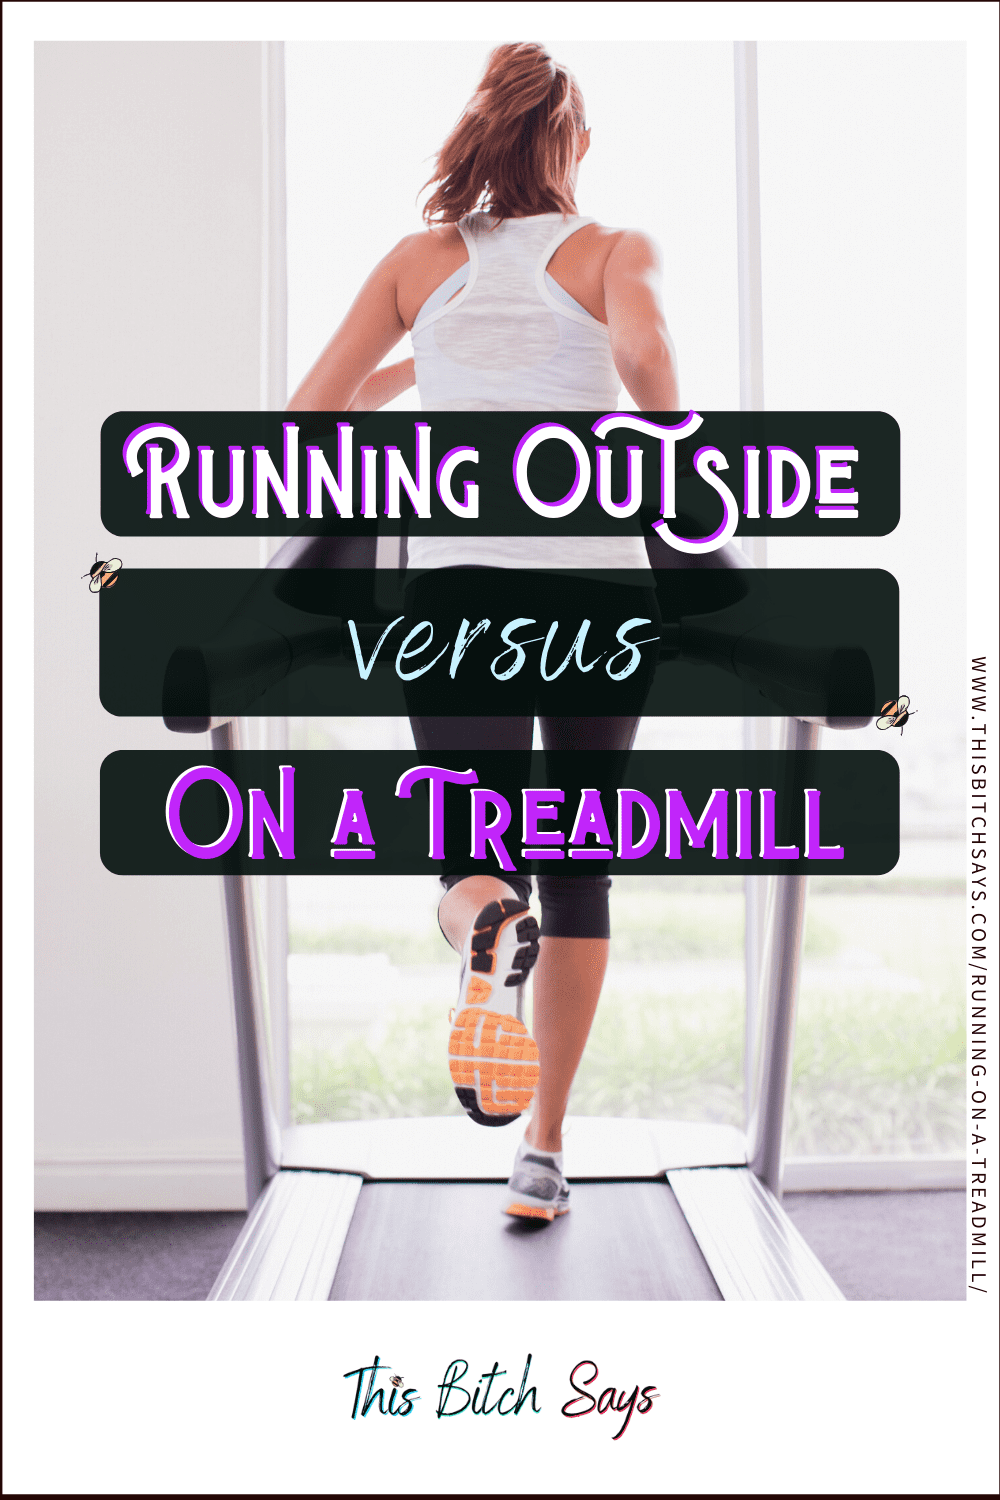 For Your Fitness: running outside versus running on a treadmill